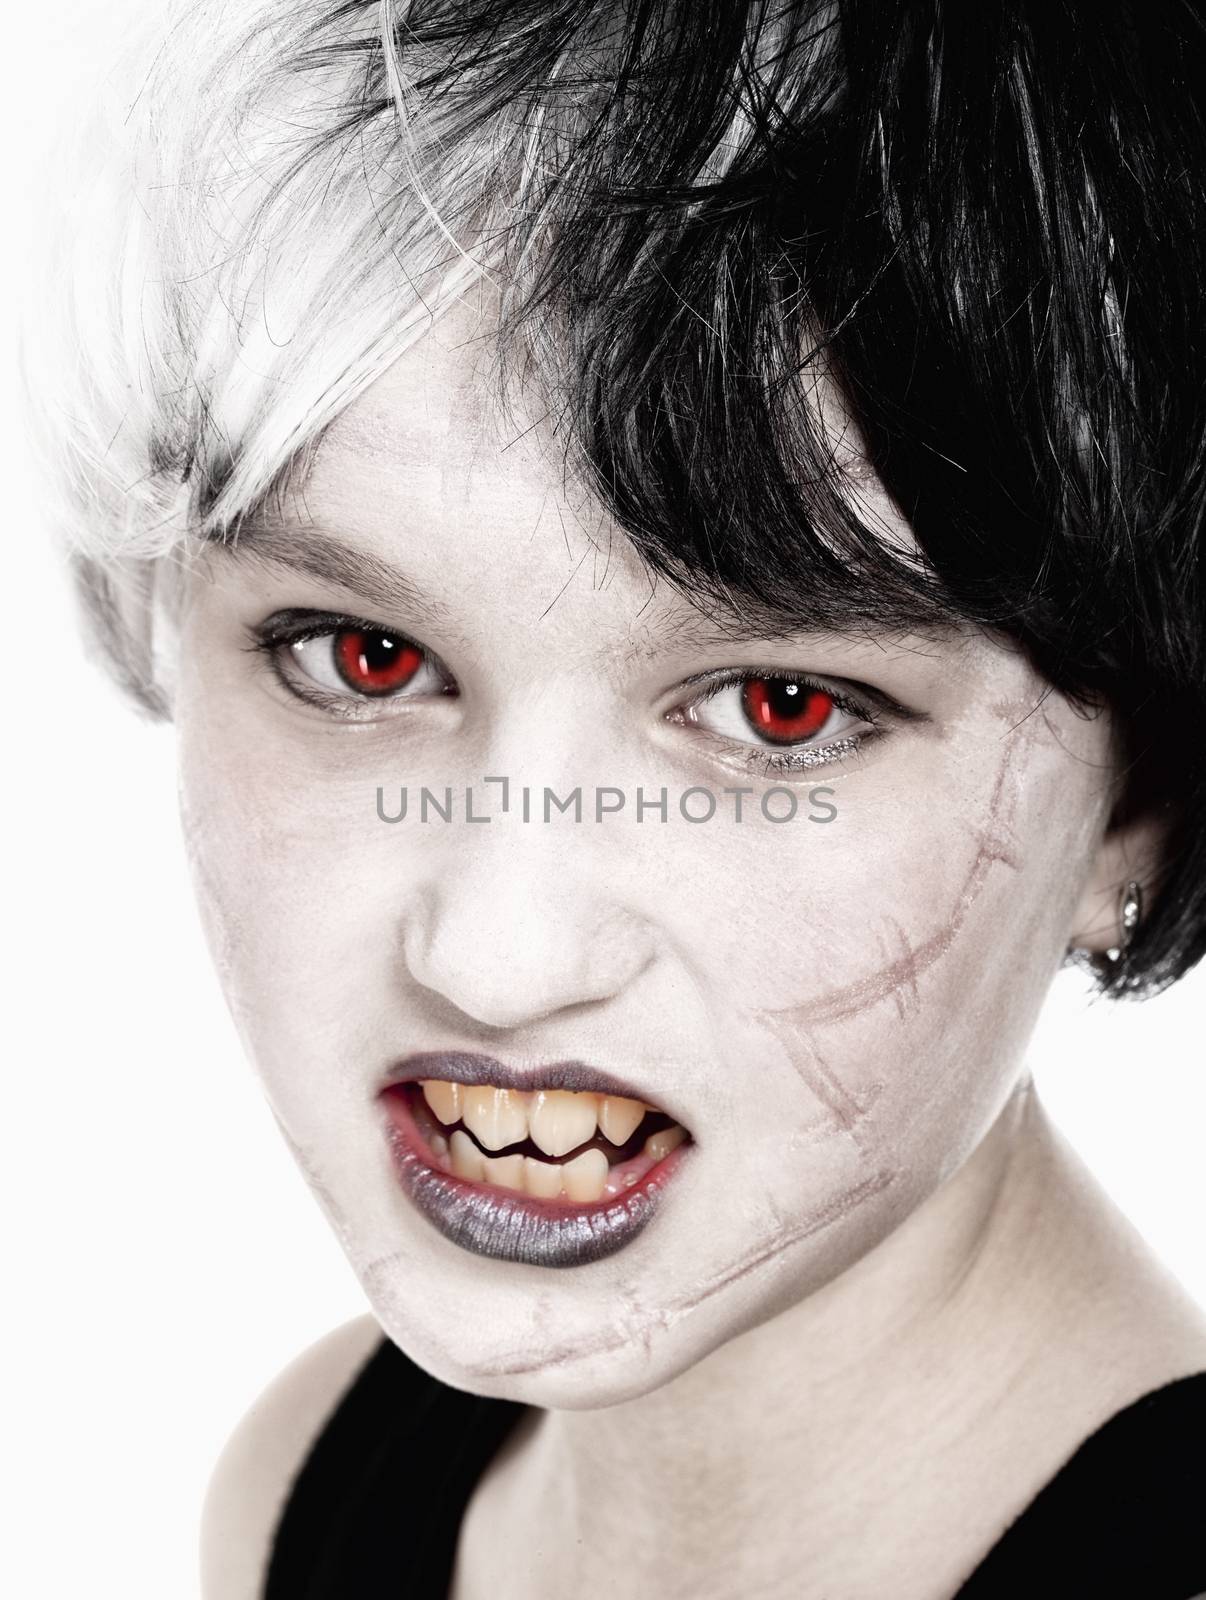 Young Girl in Wig Posing as Vampire by courtyardpix